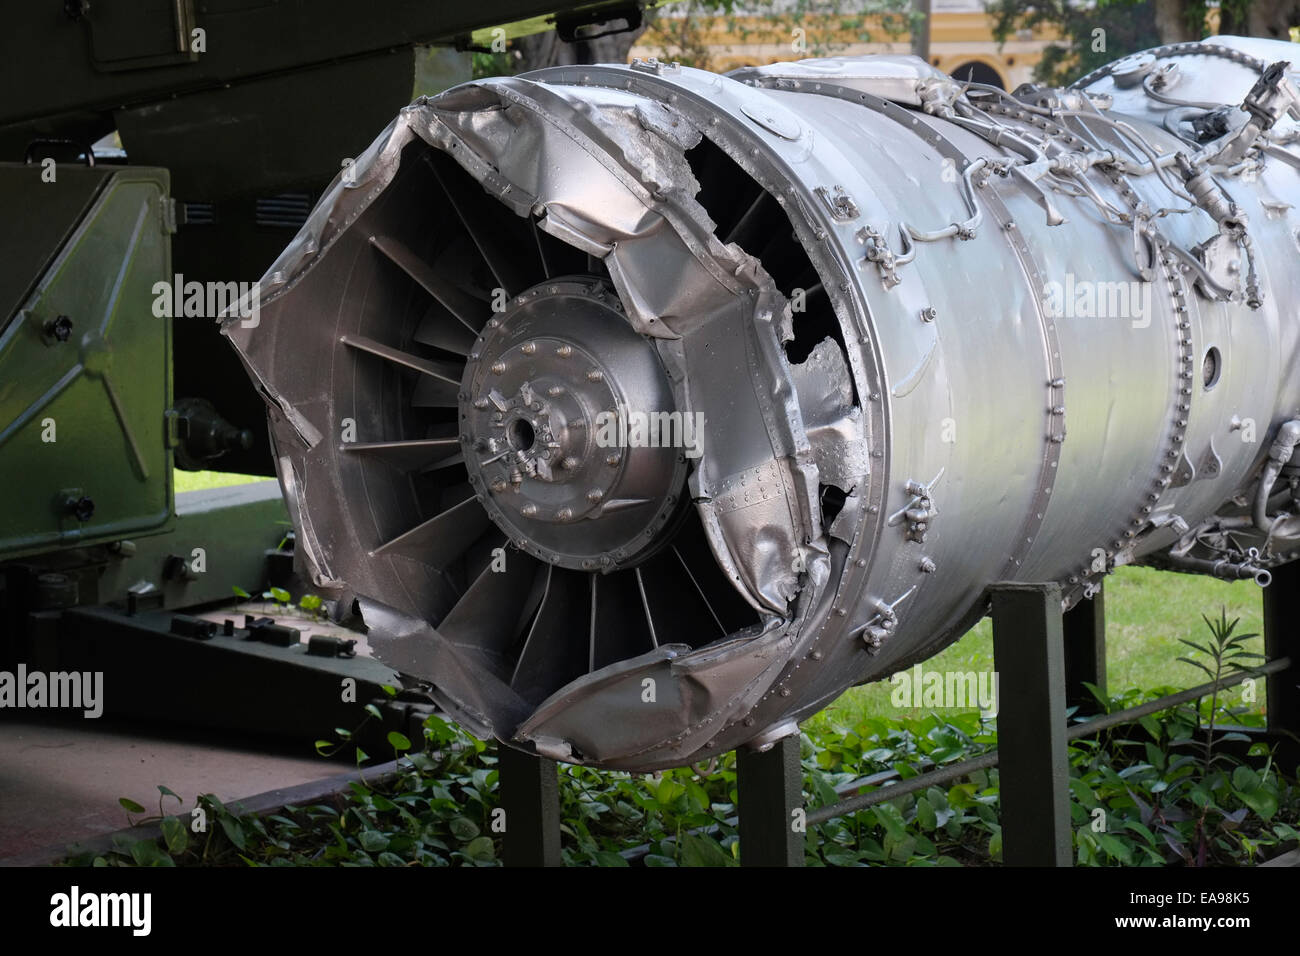 The engine from the USAF Lockheed U-2F aircraft shot down over Cuba on 27 October 1962. Museum of the Revolution, Havana, Cuba. Stock Photo